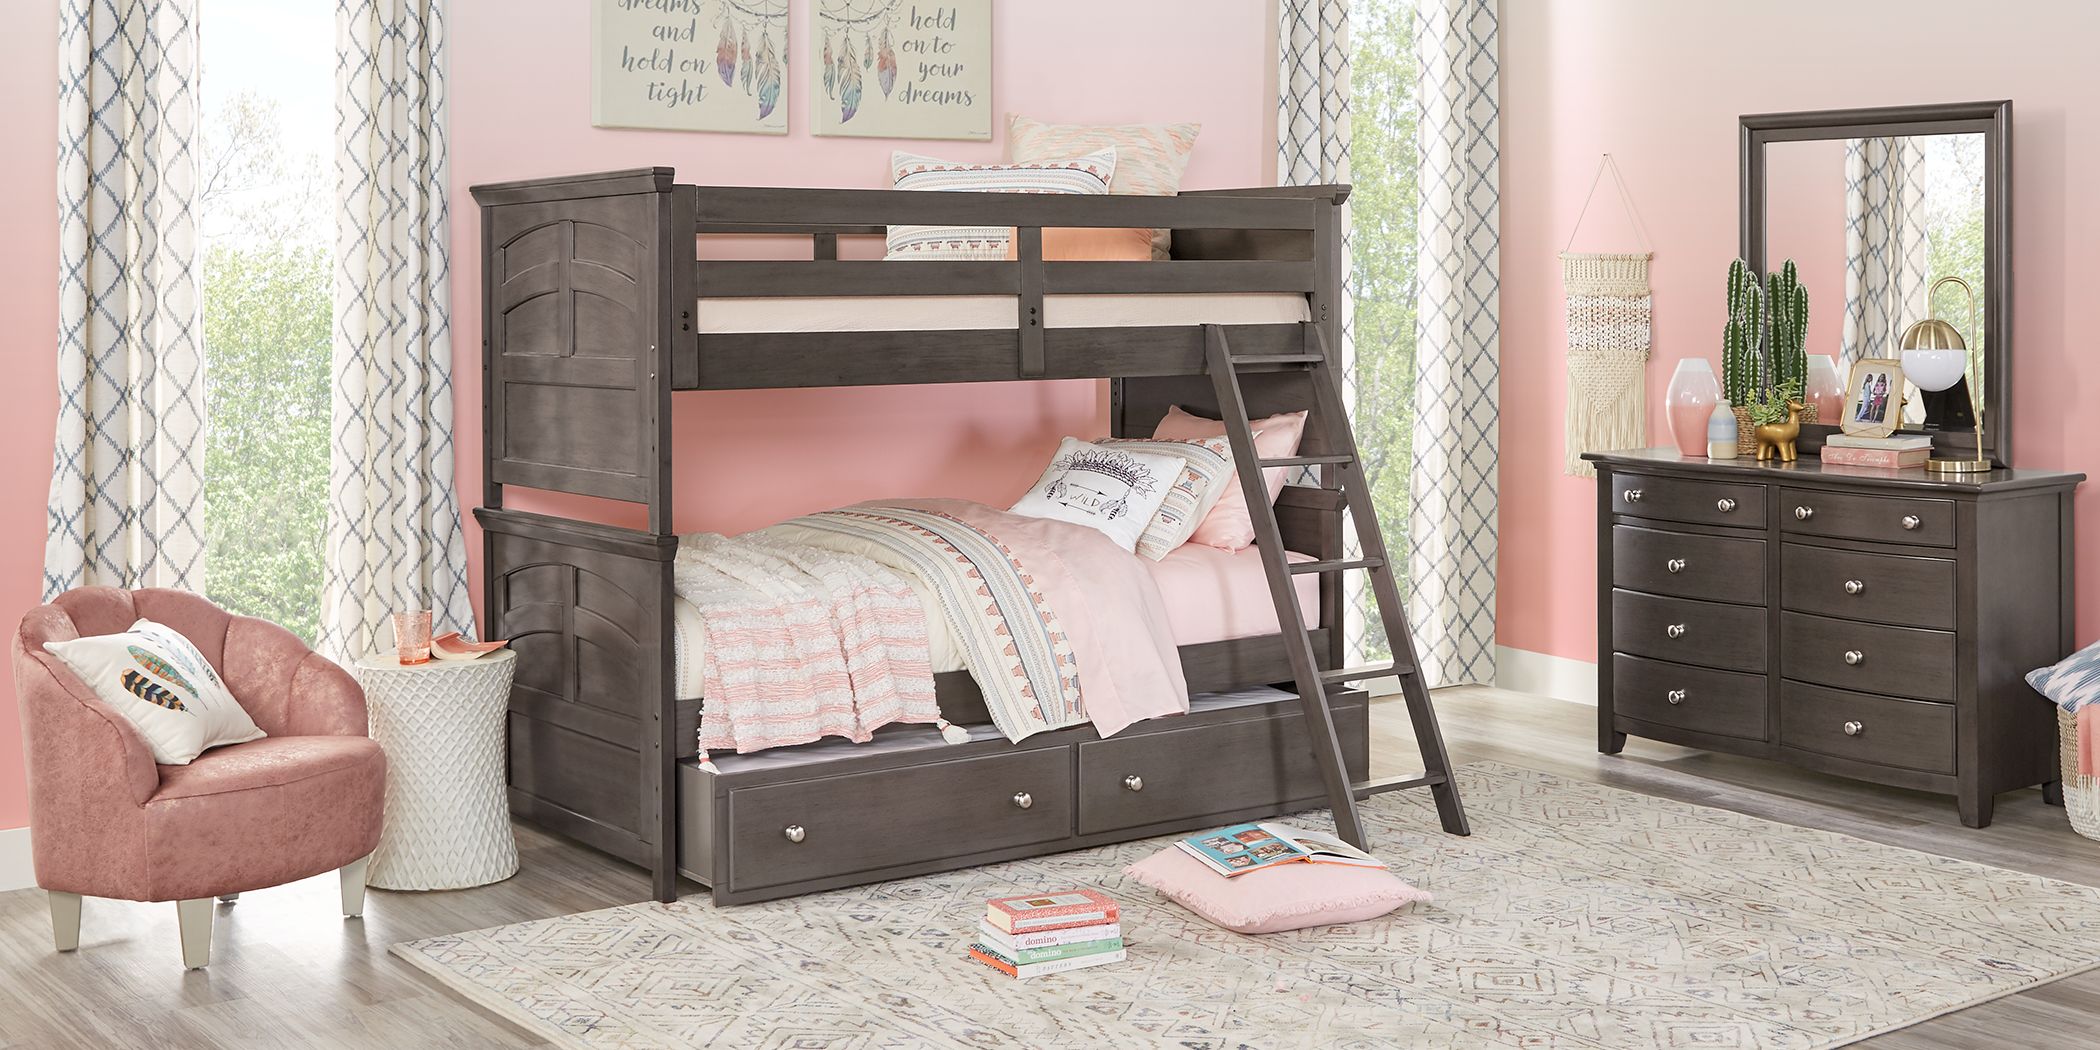 bunk beds for attic rooms